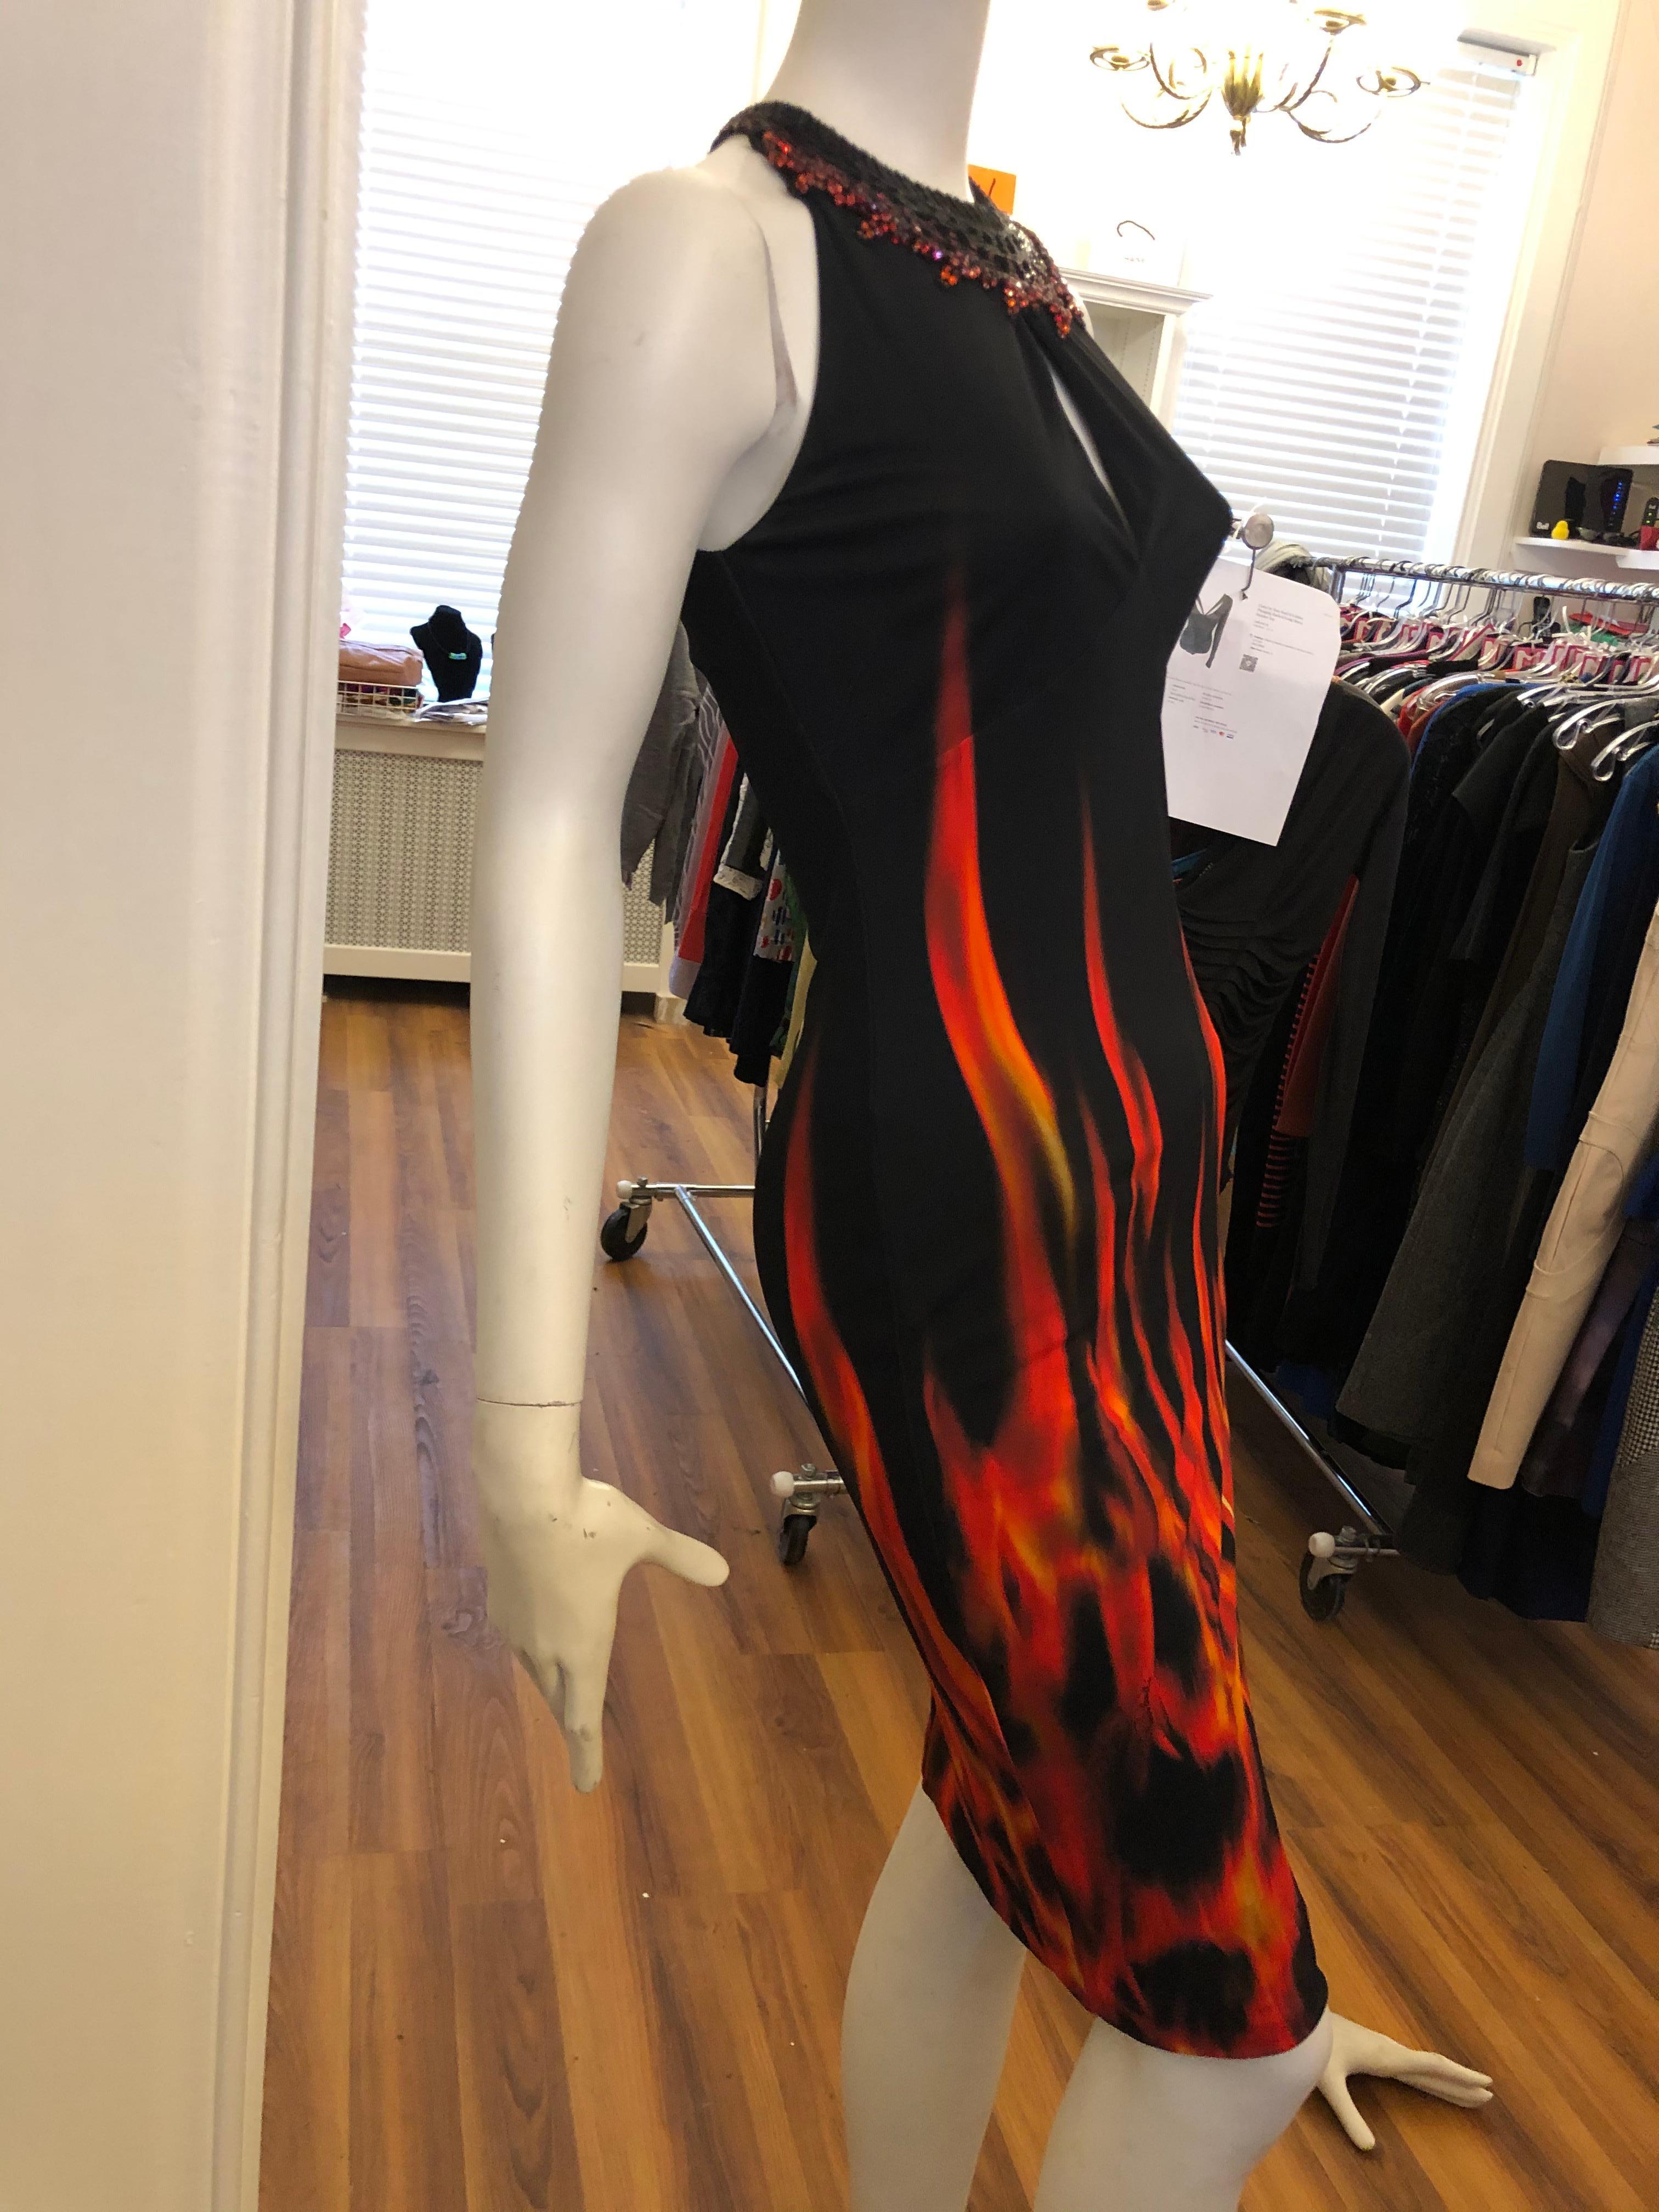 Jersey viscose and silk knee length dress with wonderful neckline with a flame design. There is also a peek-a-boo slit at the chest. The dominant colors are black and red with flashes of orange. There is a lining and a zip closure at the back.

You